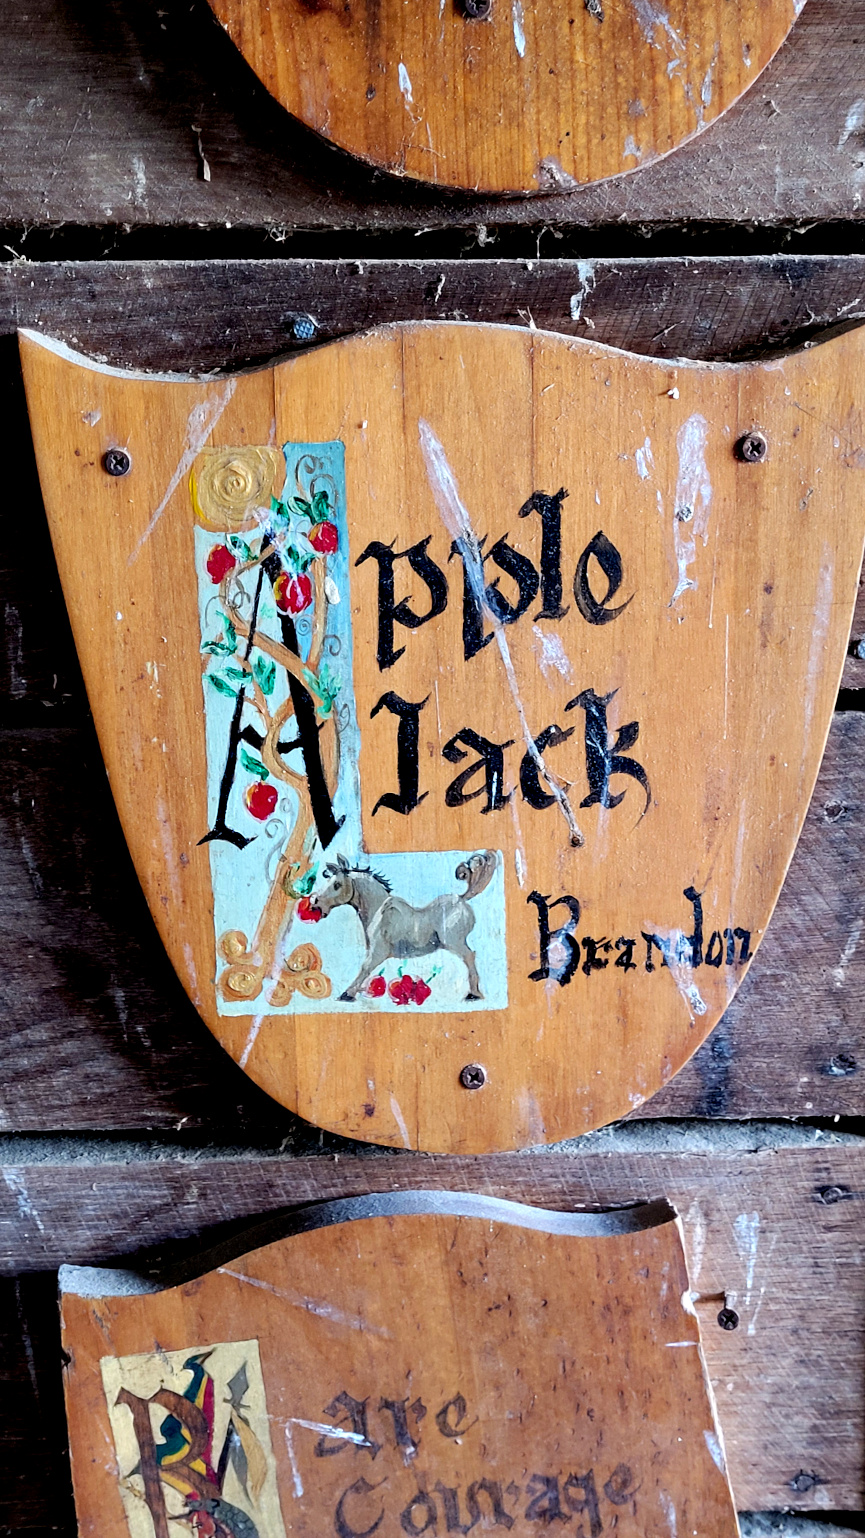 horse name plate for "Apple Jack"